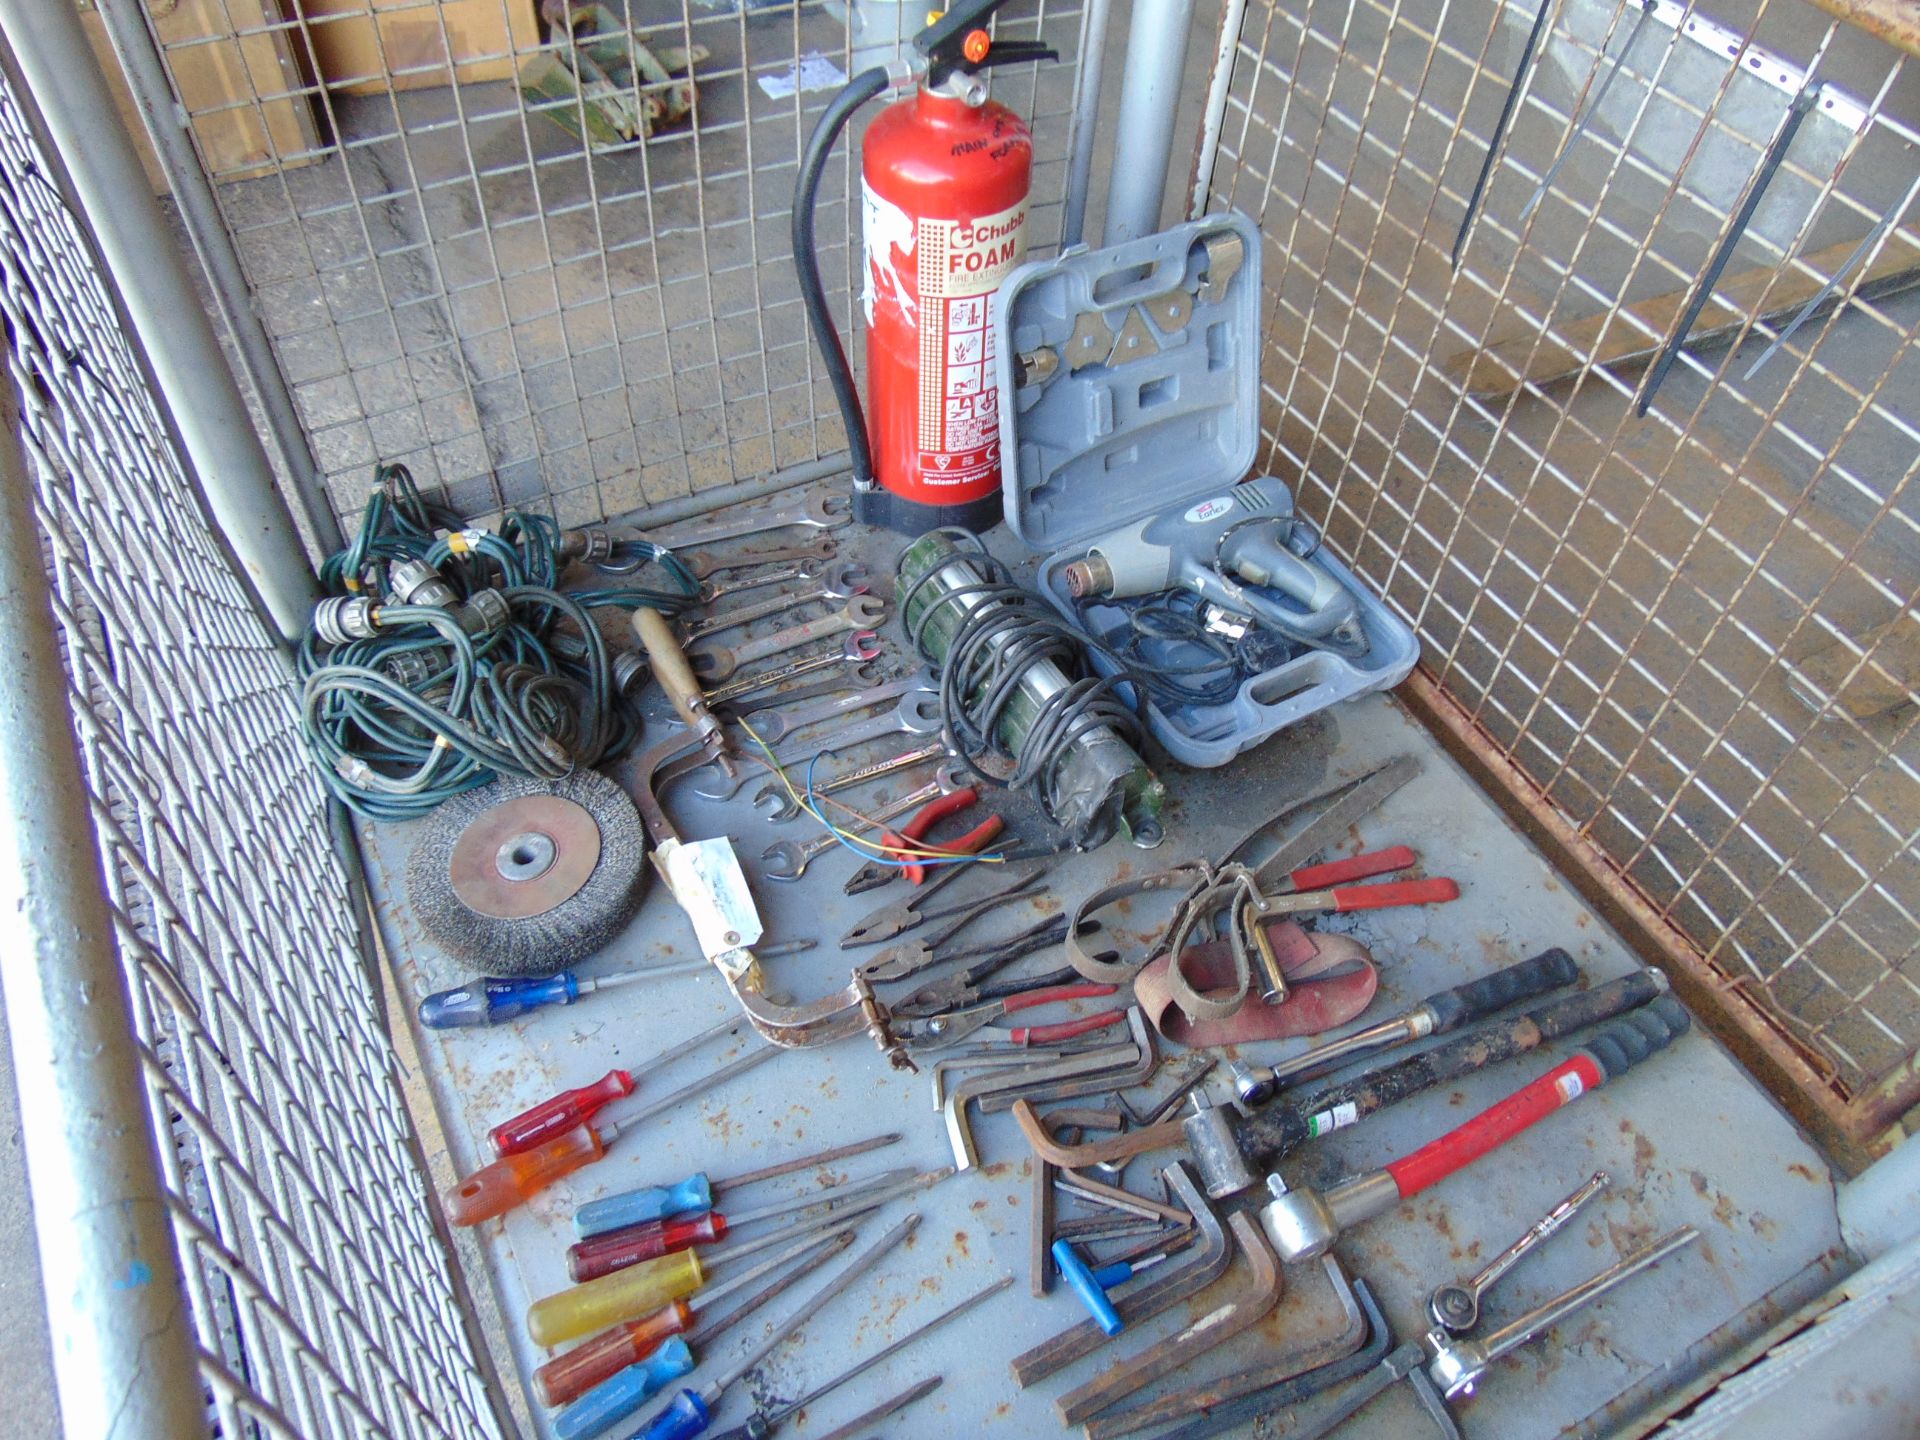 1 x Stillage of Workshop Tools, Spanners, Lights, Torque Wrenches etc